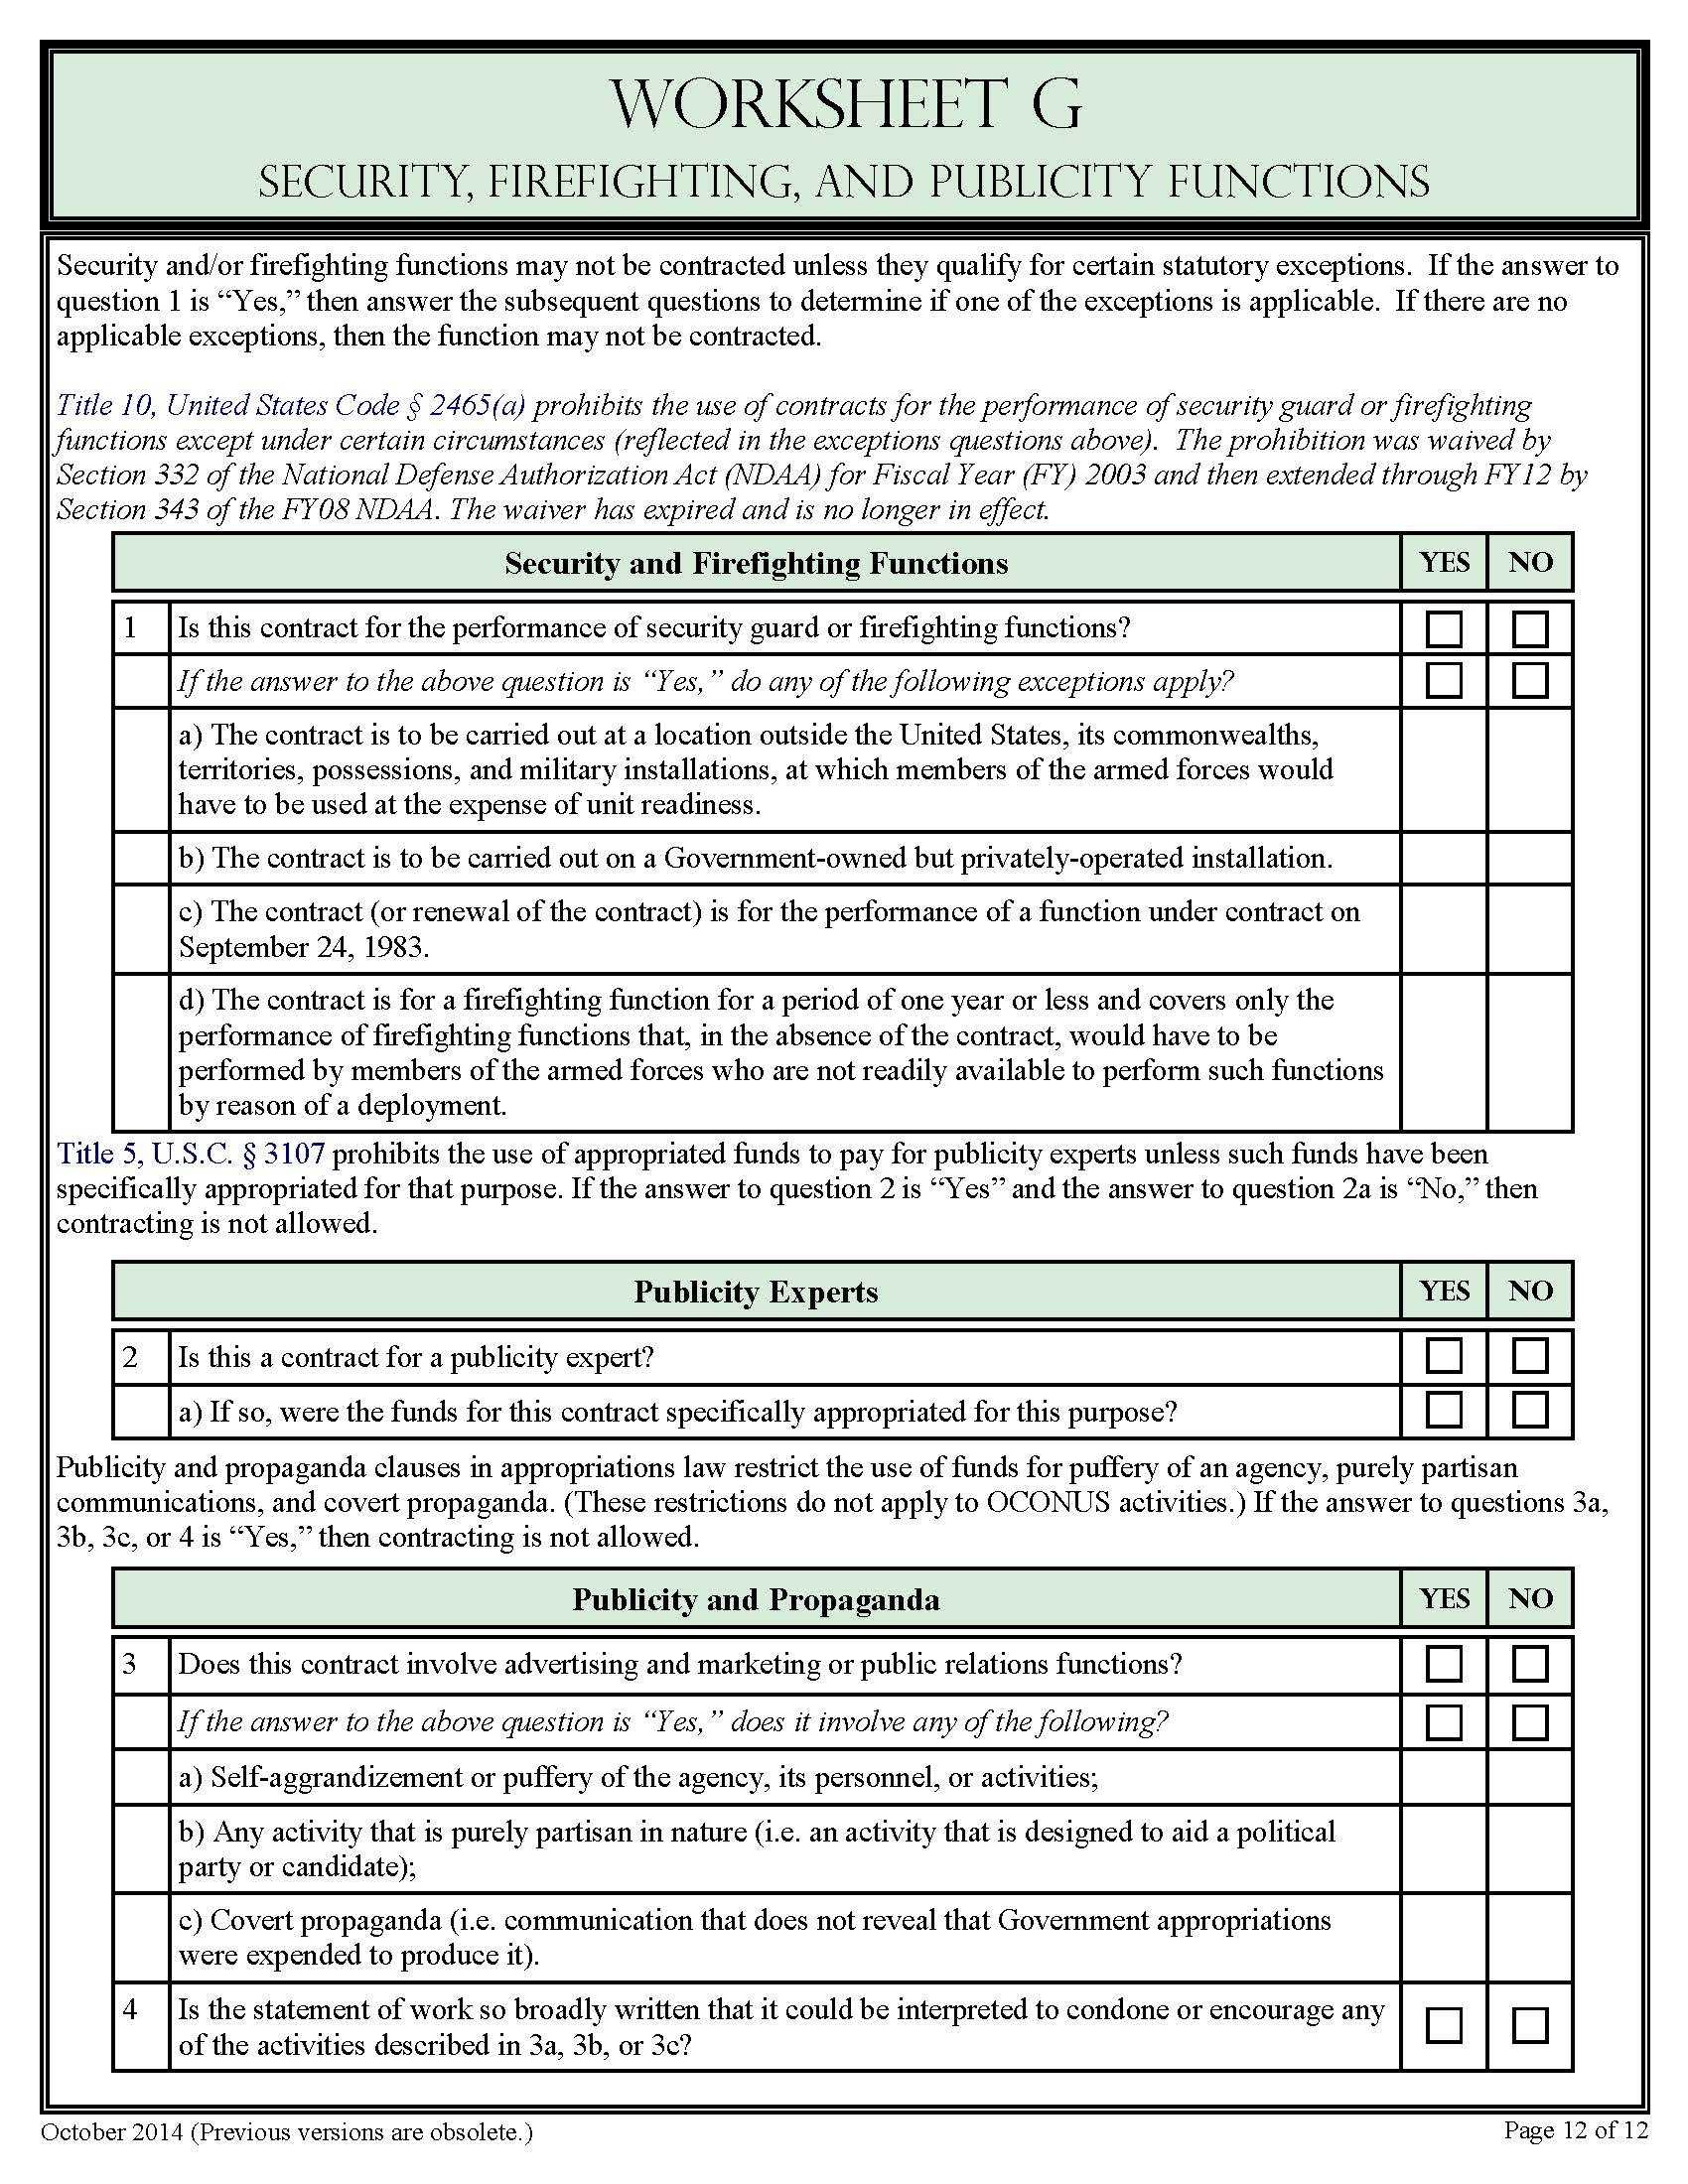 Chapter 5 Supply Economics Worksheet Answers Along with 5 Request for Contract Approval 6th Bde Jrotc Supply